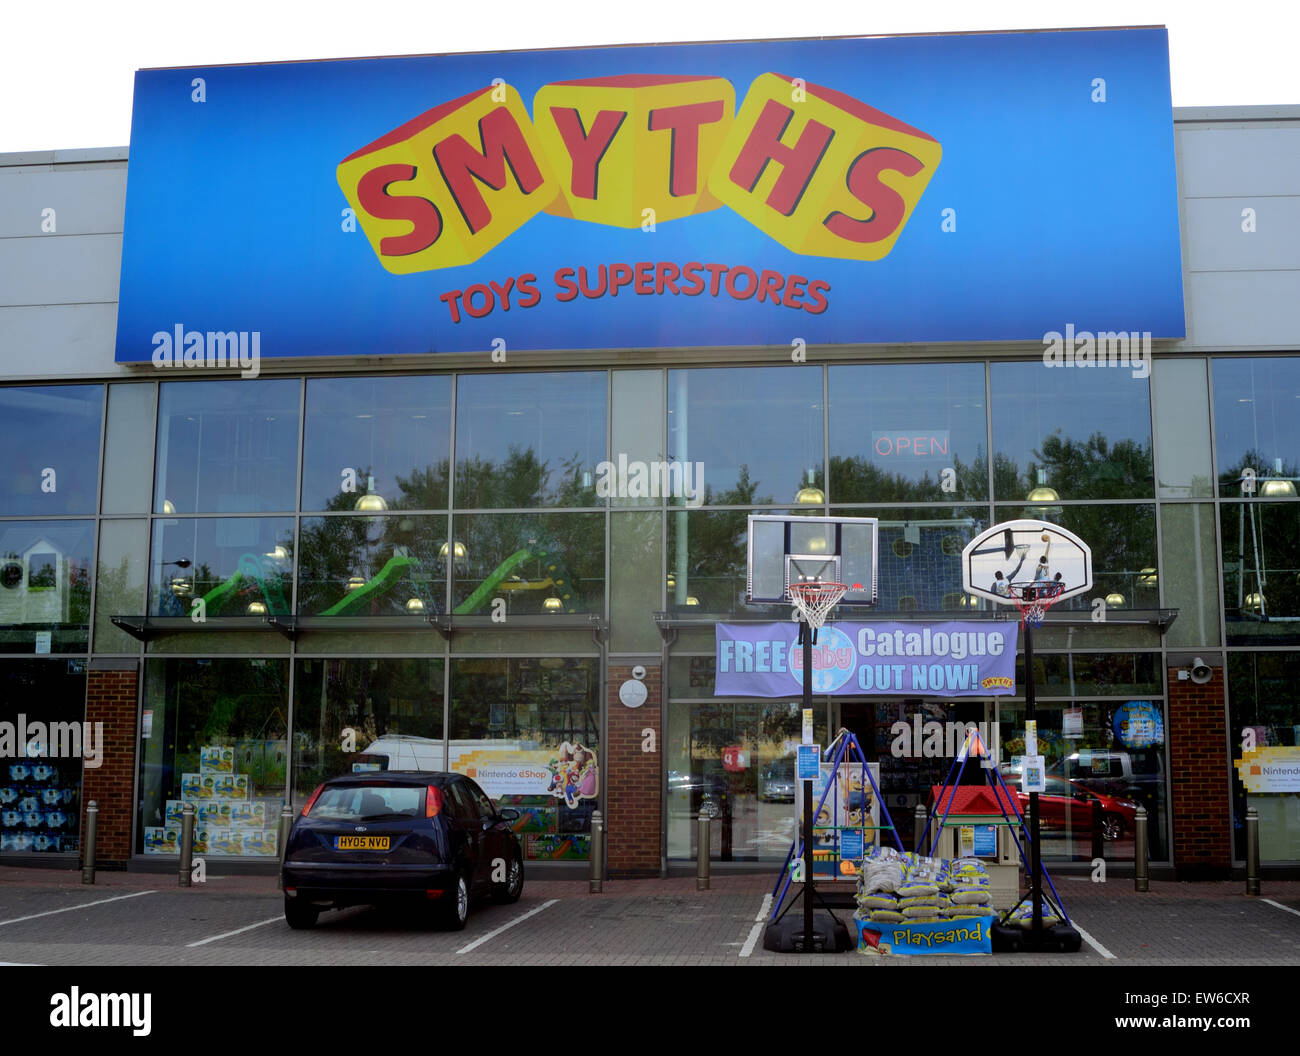 Smyths Toy Superstore in Fareham announces closure leaving locals 'gutted